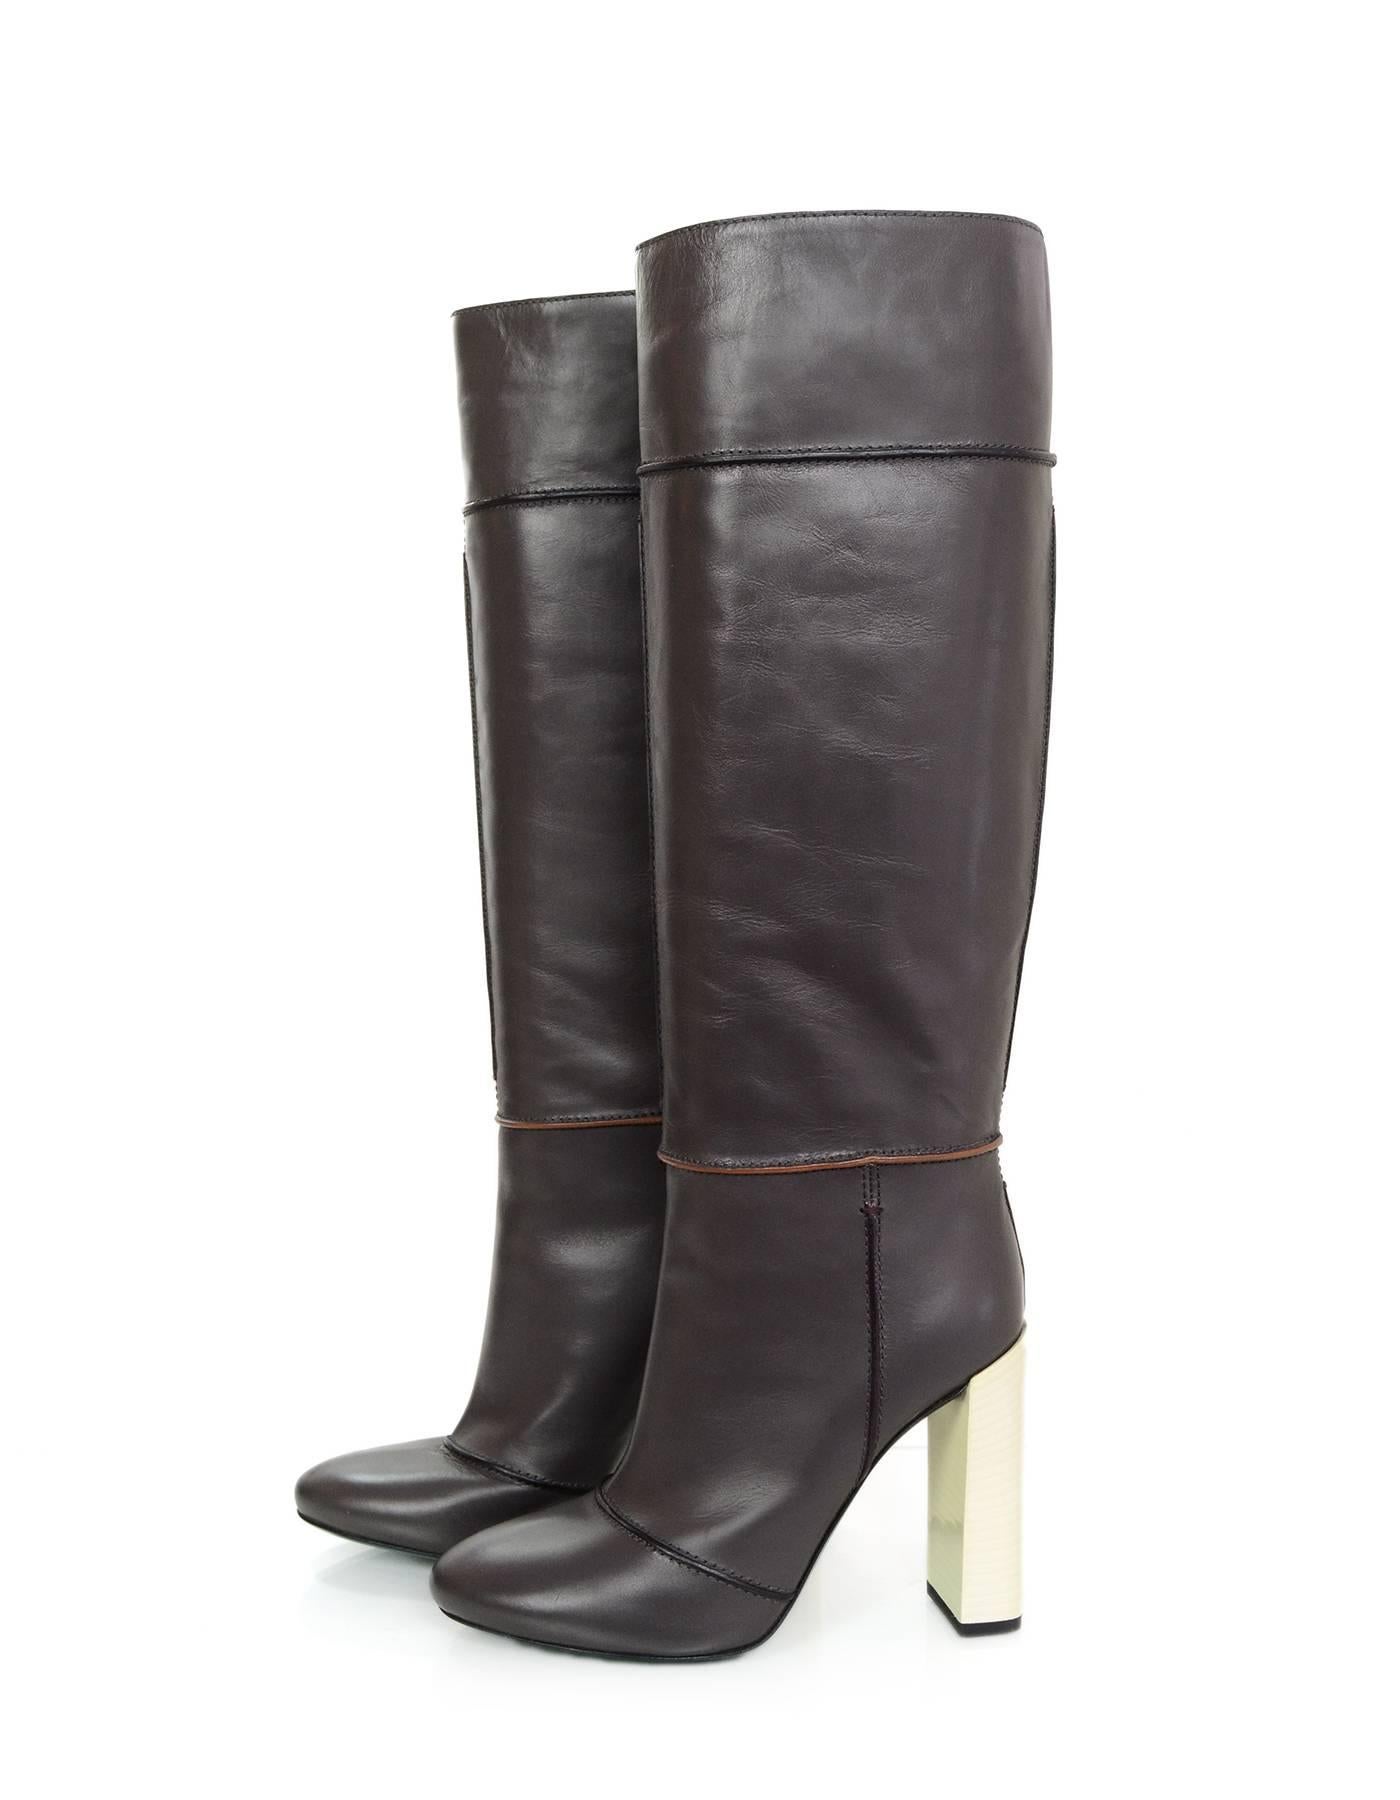 Fendi Grey Leather Mikado Knee High Boots 
Features white stacked heel and green soles

Made In: Italy
Color: Grey, white and green
Materials: Leather
Closure/Opening: Pull on
Sole Stamp: Fendi Made in Italy Vero Cuoio 39
Retail Price: $1,550 +